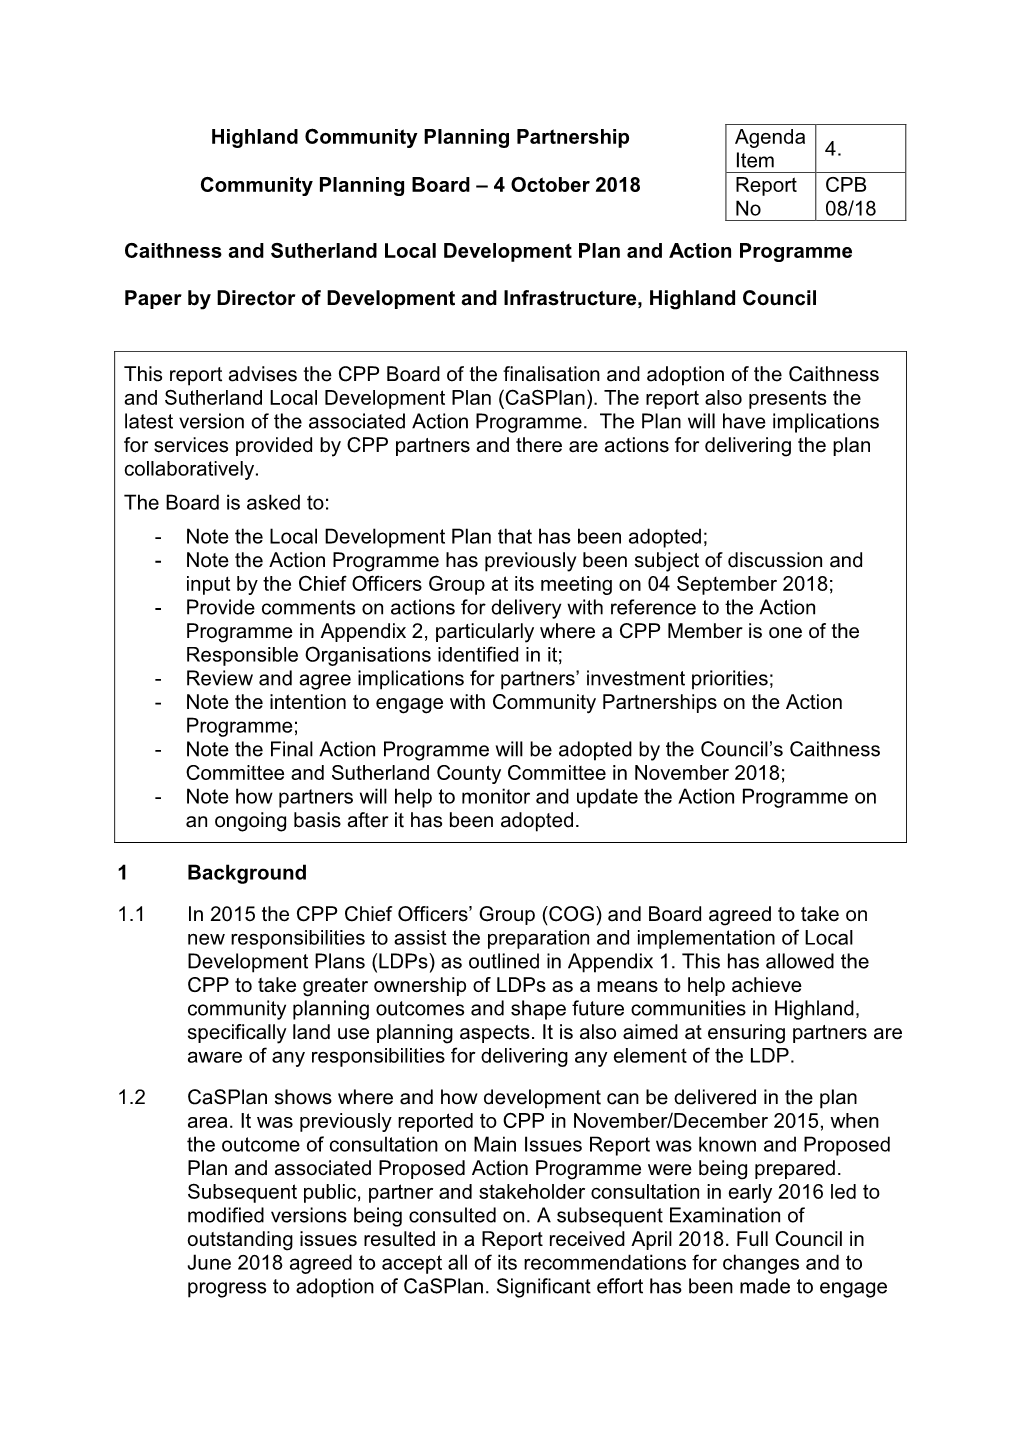 Item 4: Caithness and Sutherland Local Development Plan and Action Programme